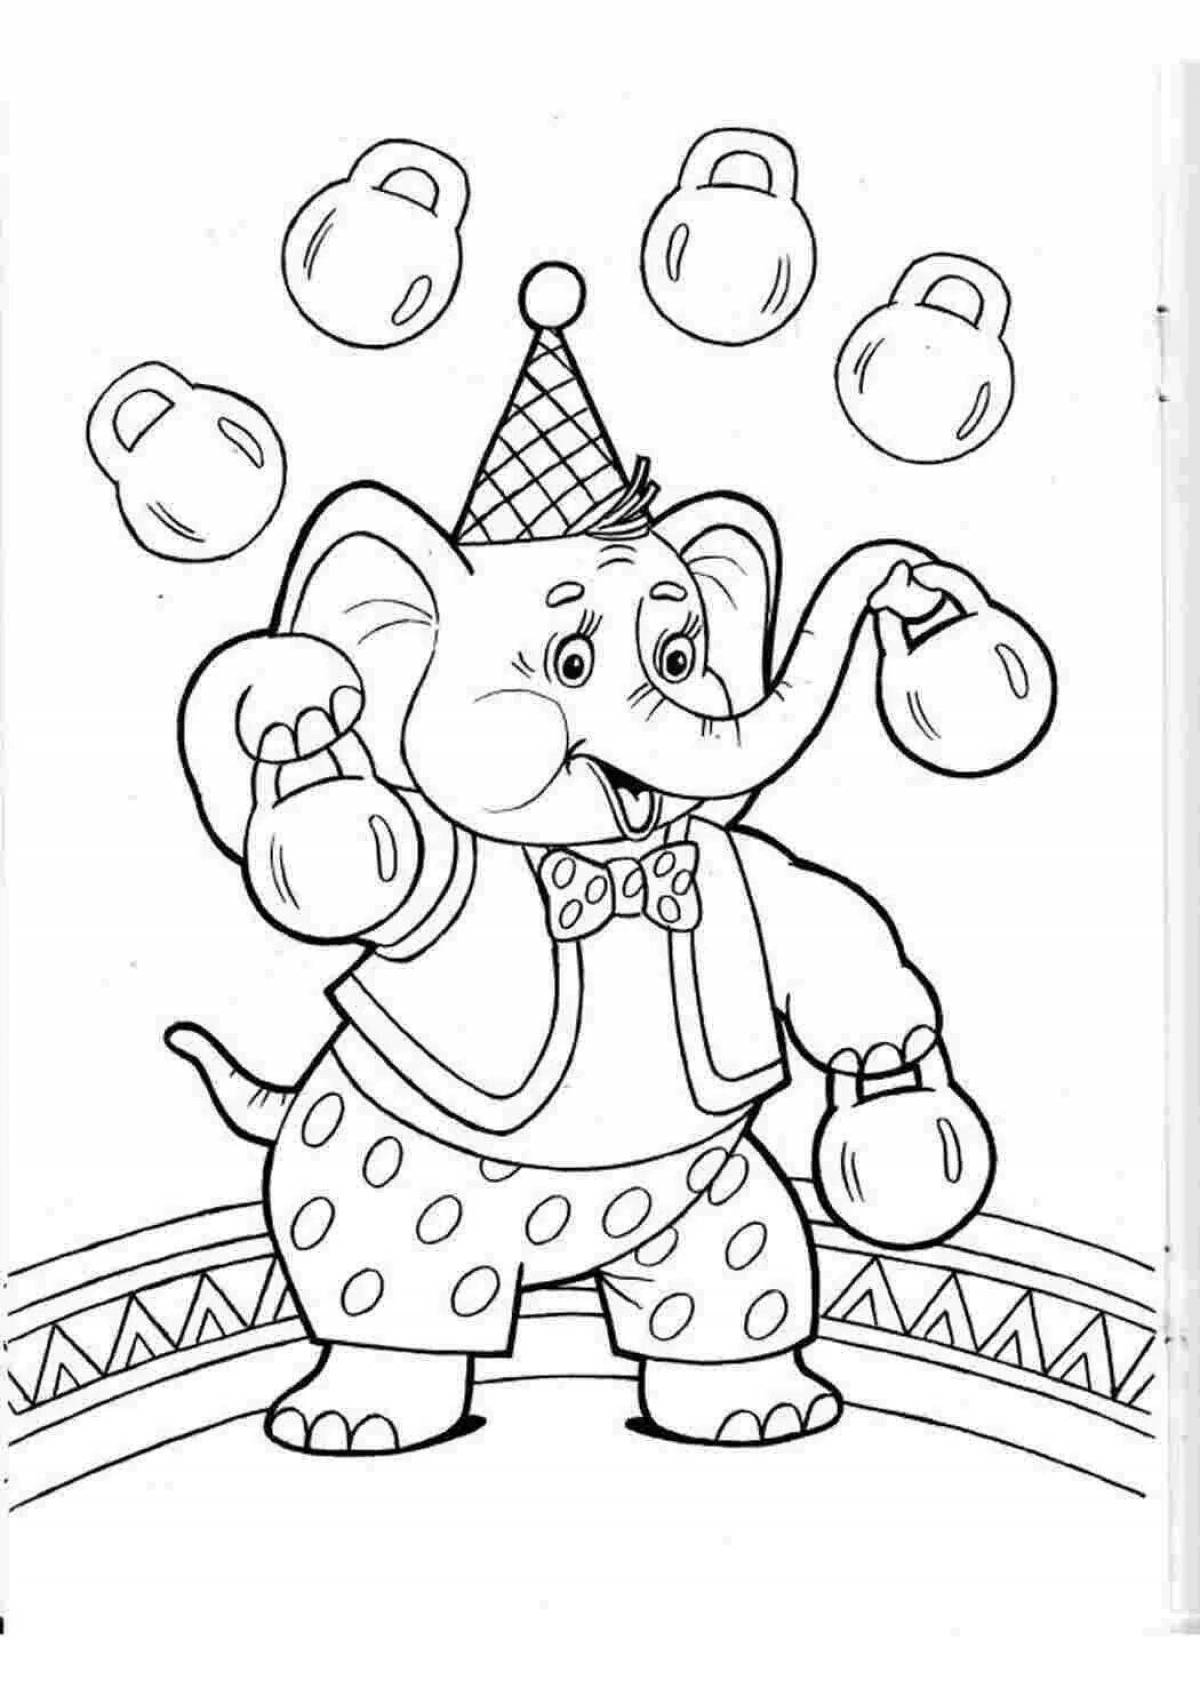 Merry circus coloring for kids